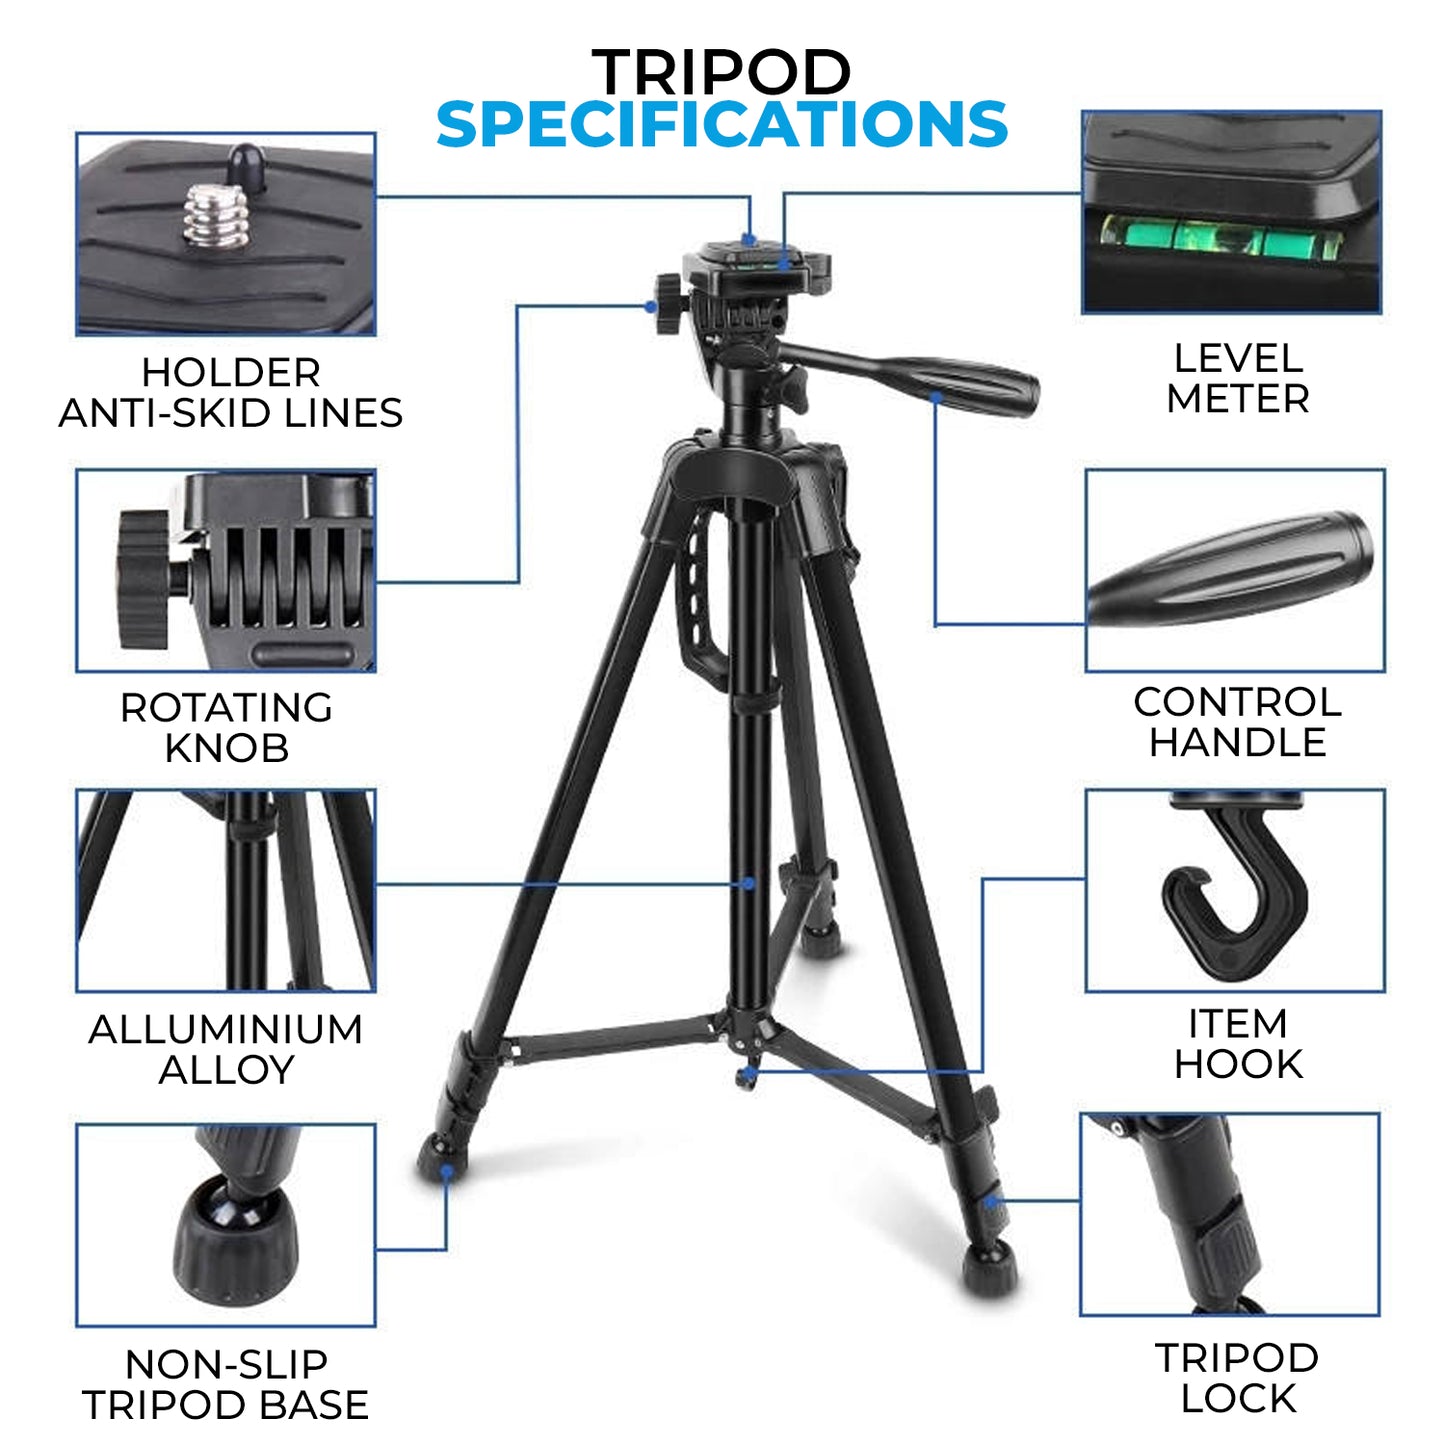 WRADER Metal Tripod with Clip Tripod Stand for Mobile DSLR Camera and Video Camera Tripod  (Black, Supports Up to 5000 g)